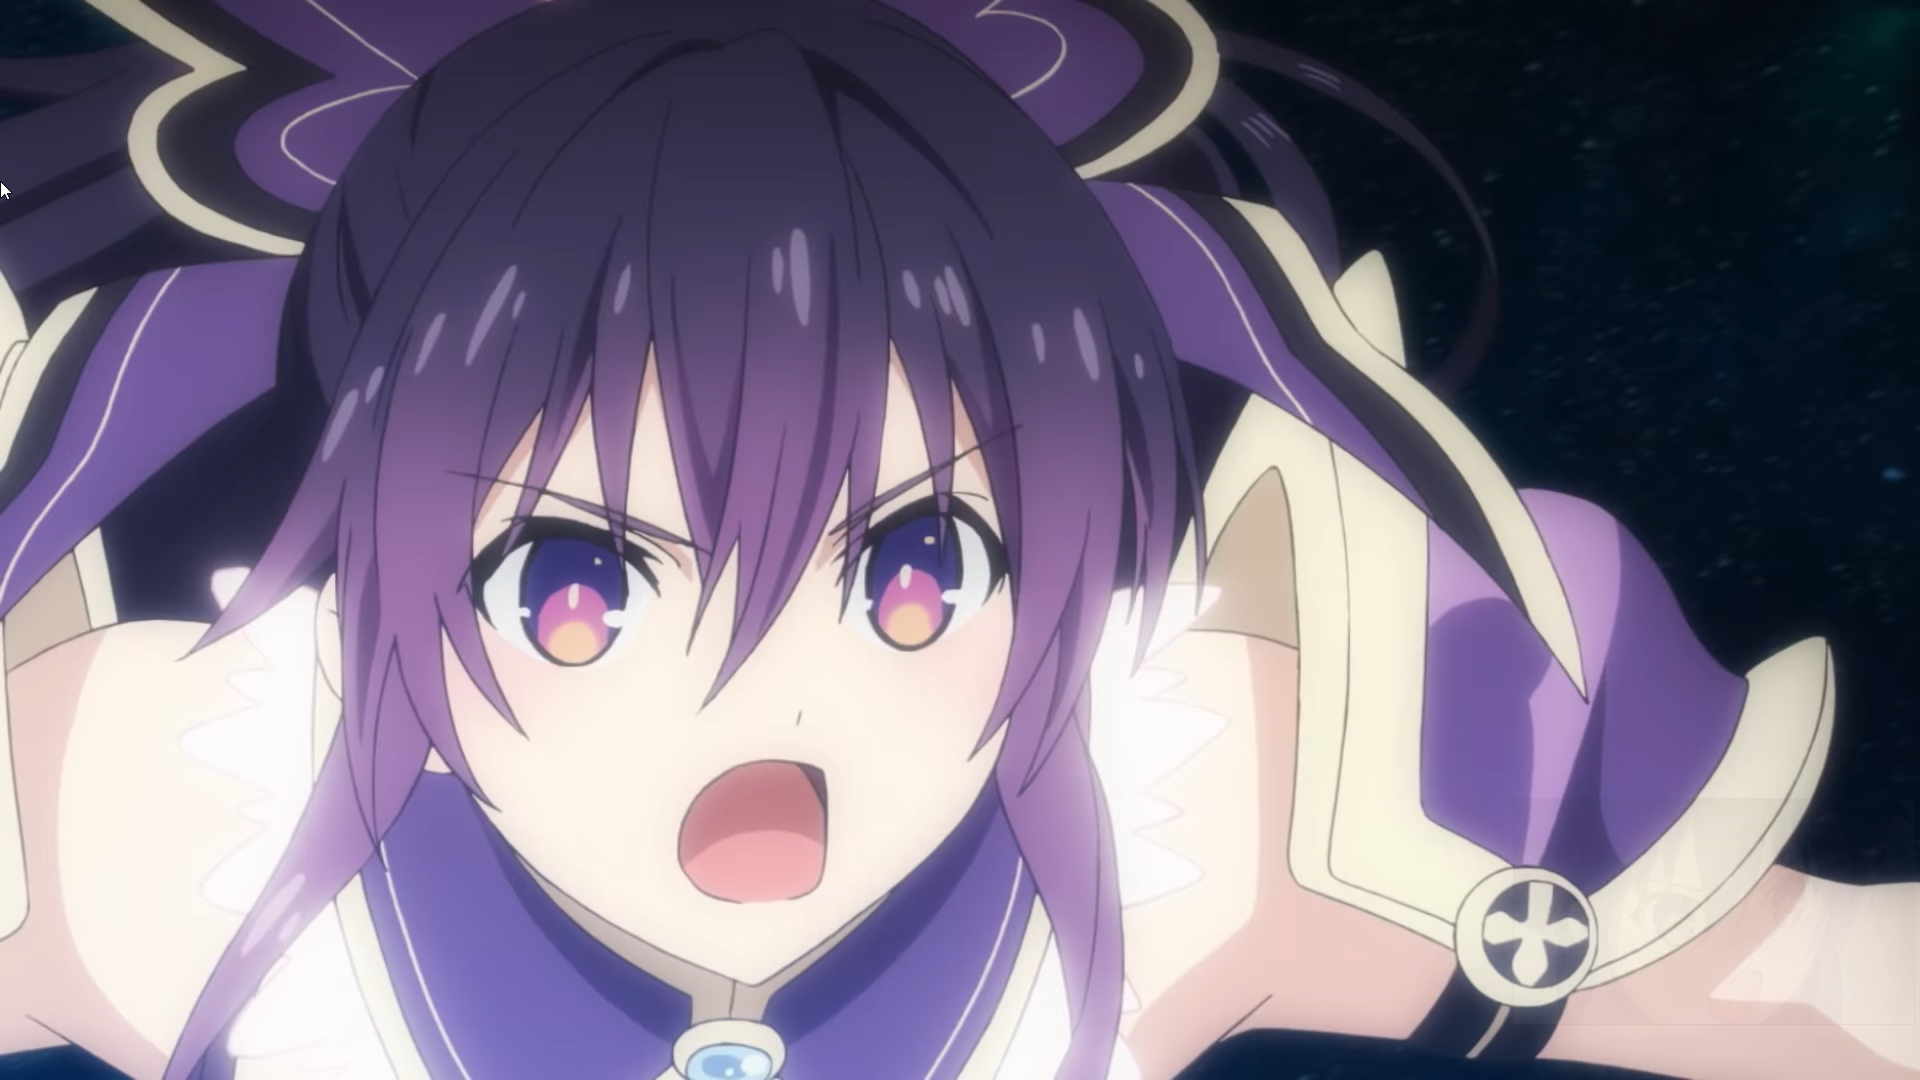 Date A Live IV Postponed From October to 2022, First Trailer Released